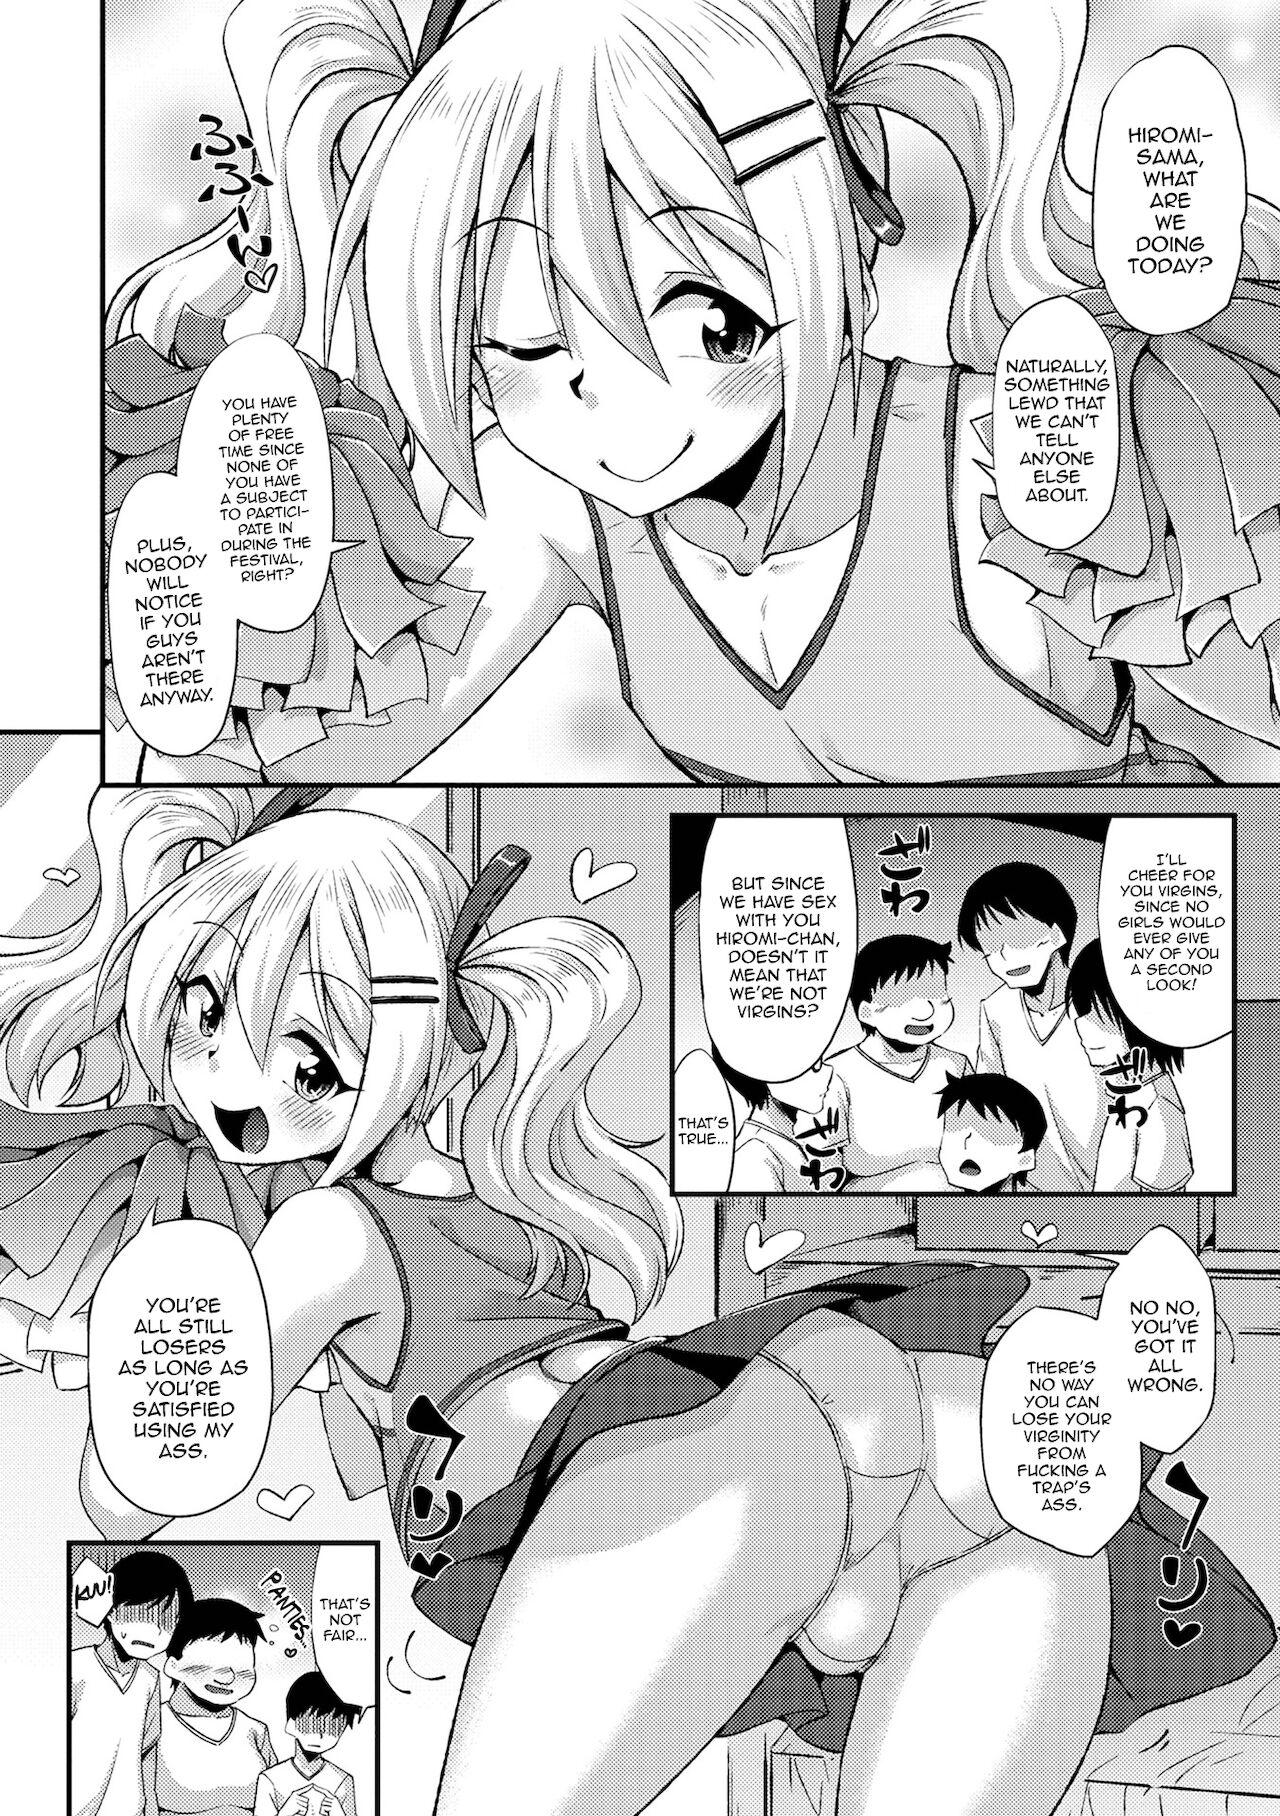 Her Doutei Cheerleading! Spy Camera - Page 2